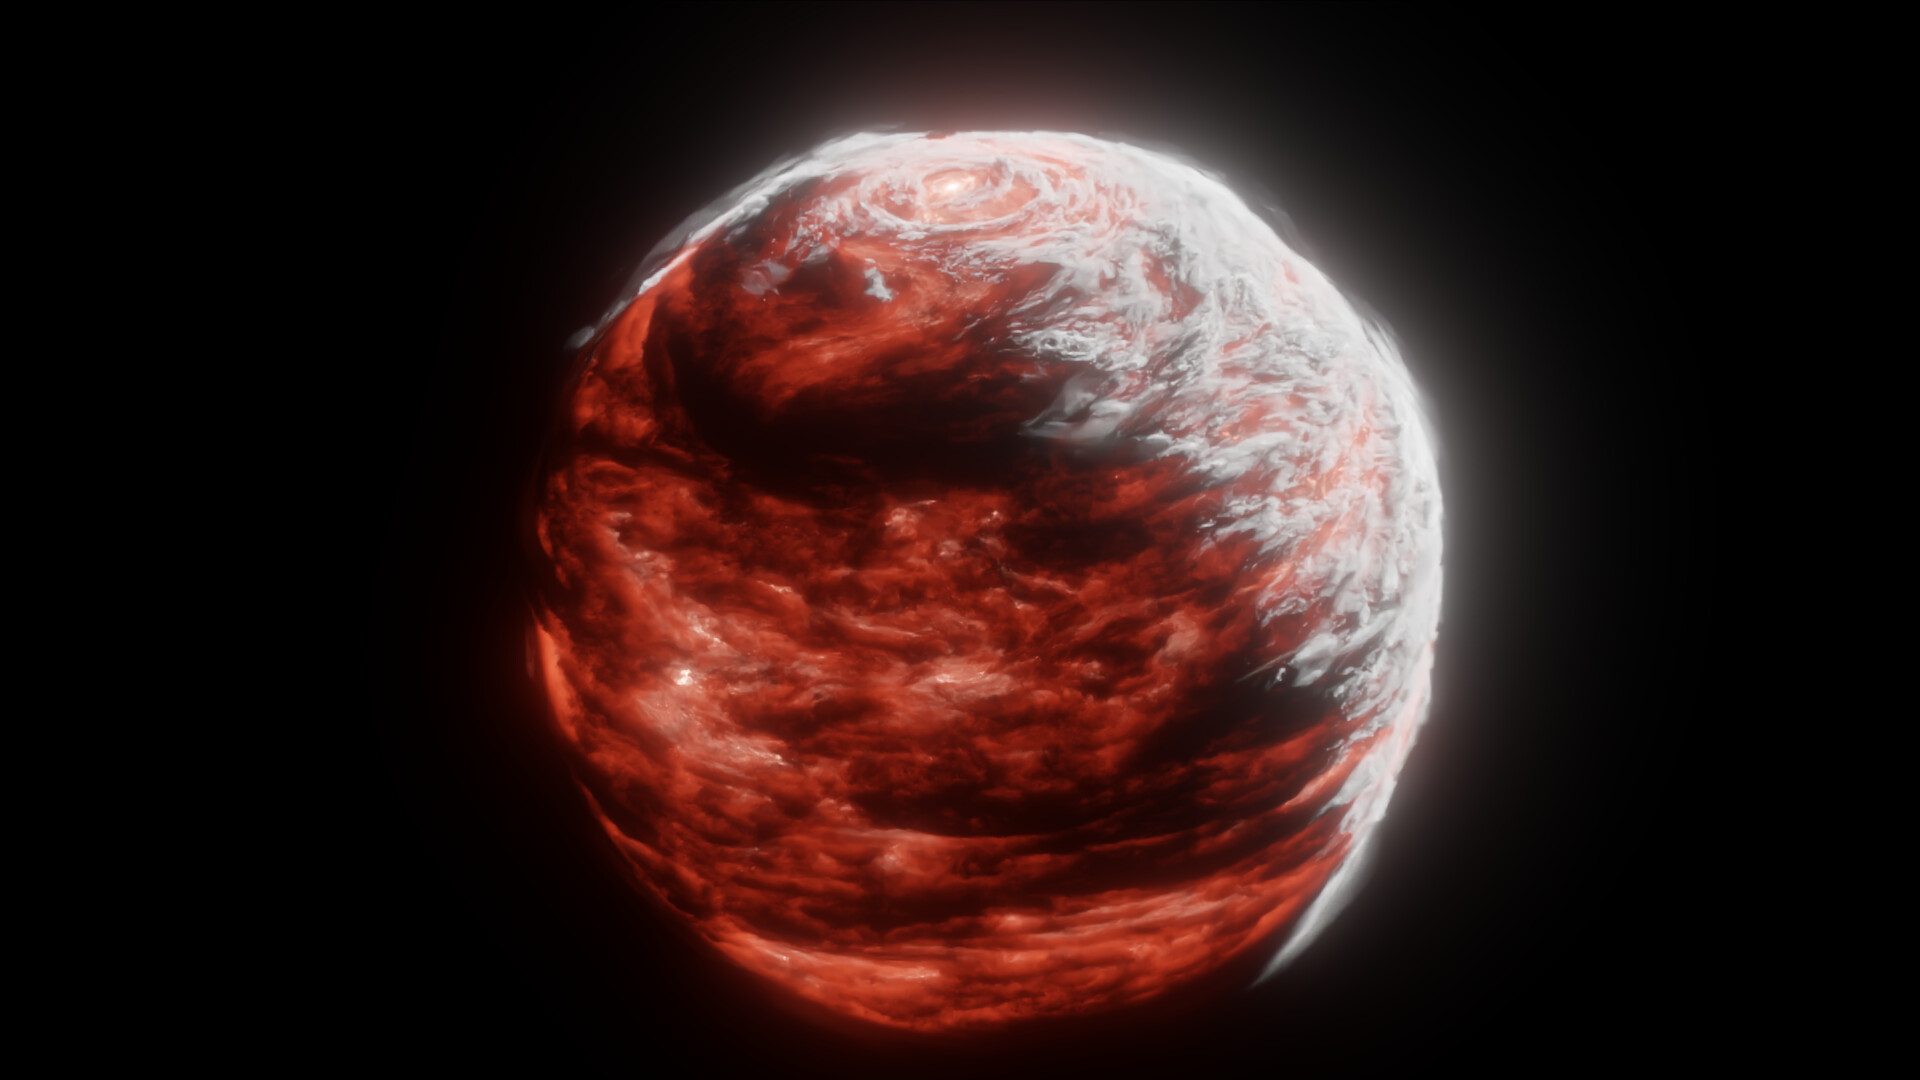 red gas giant